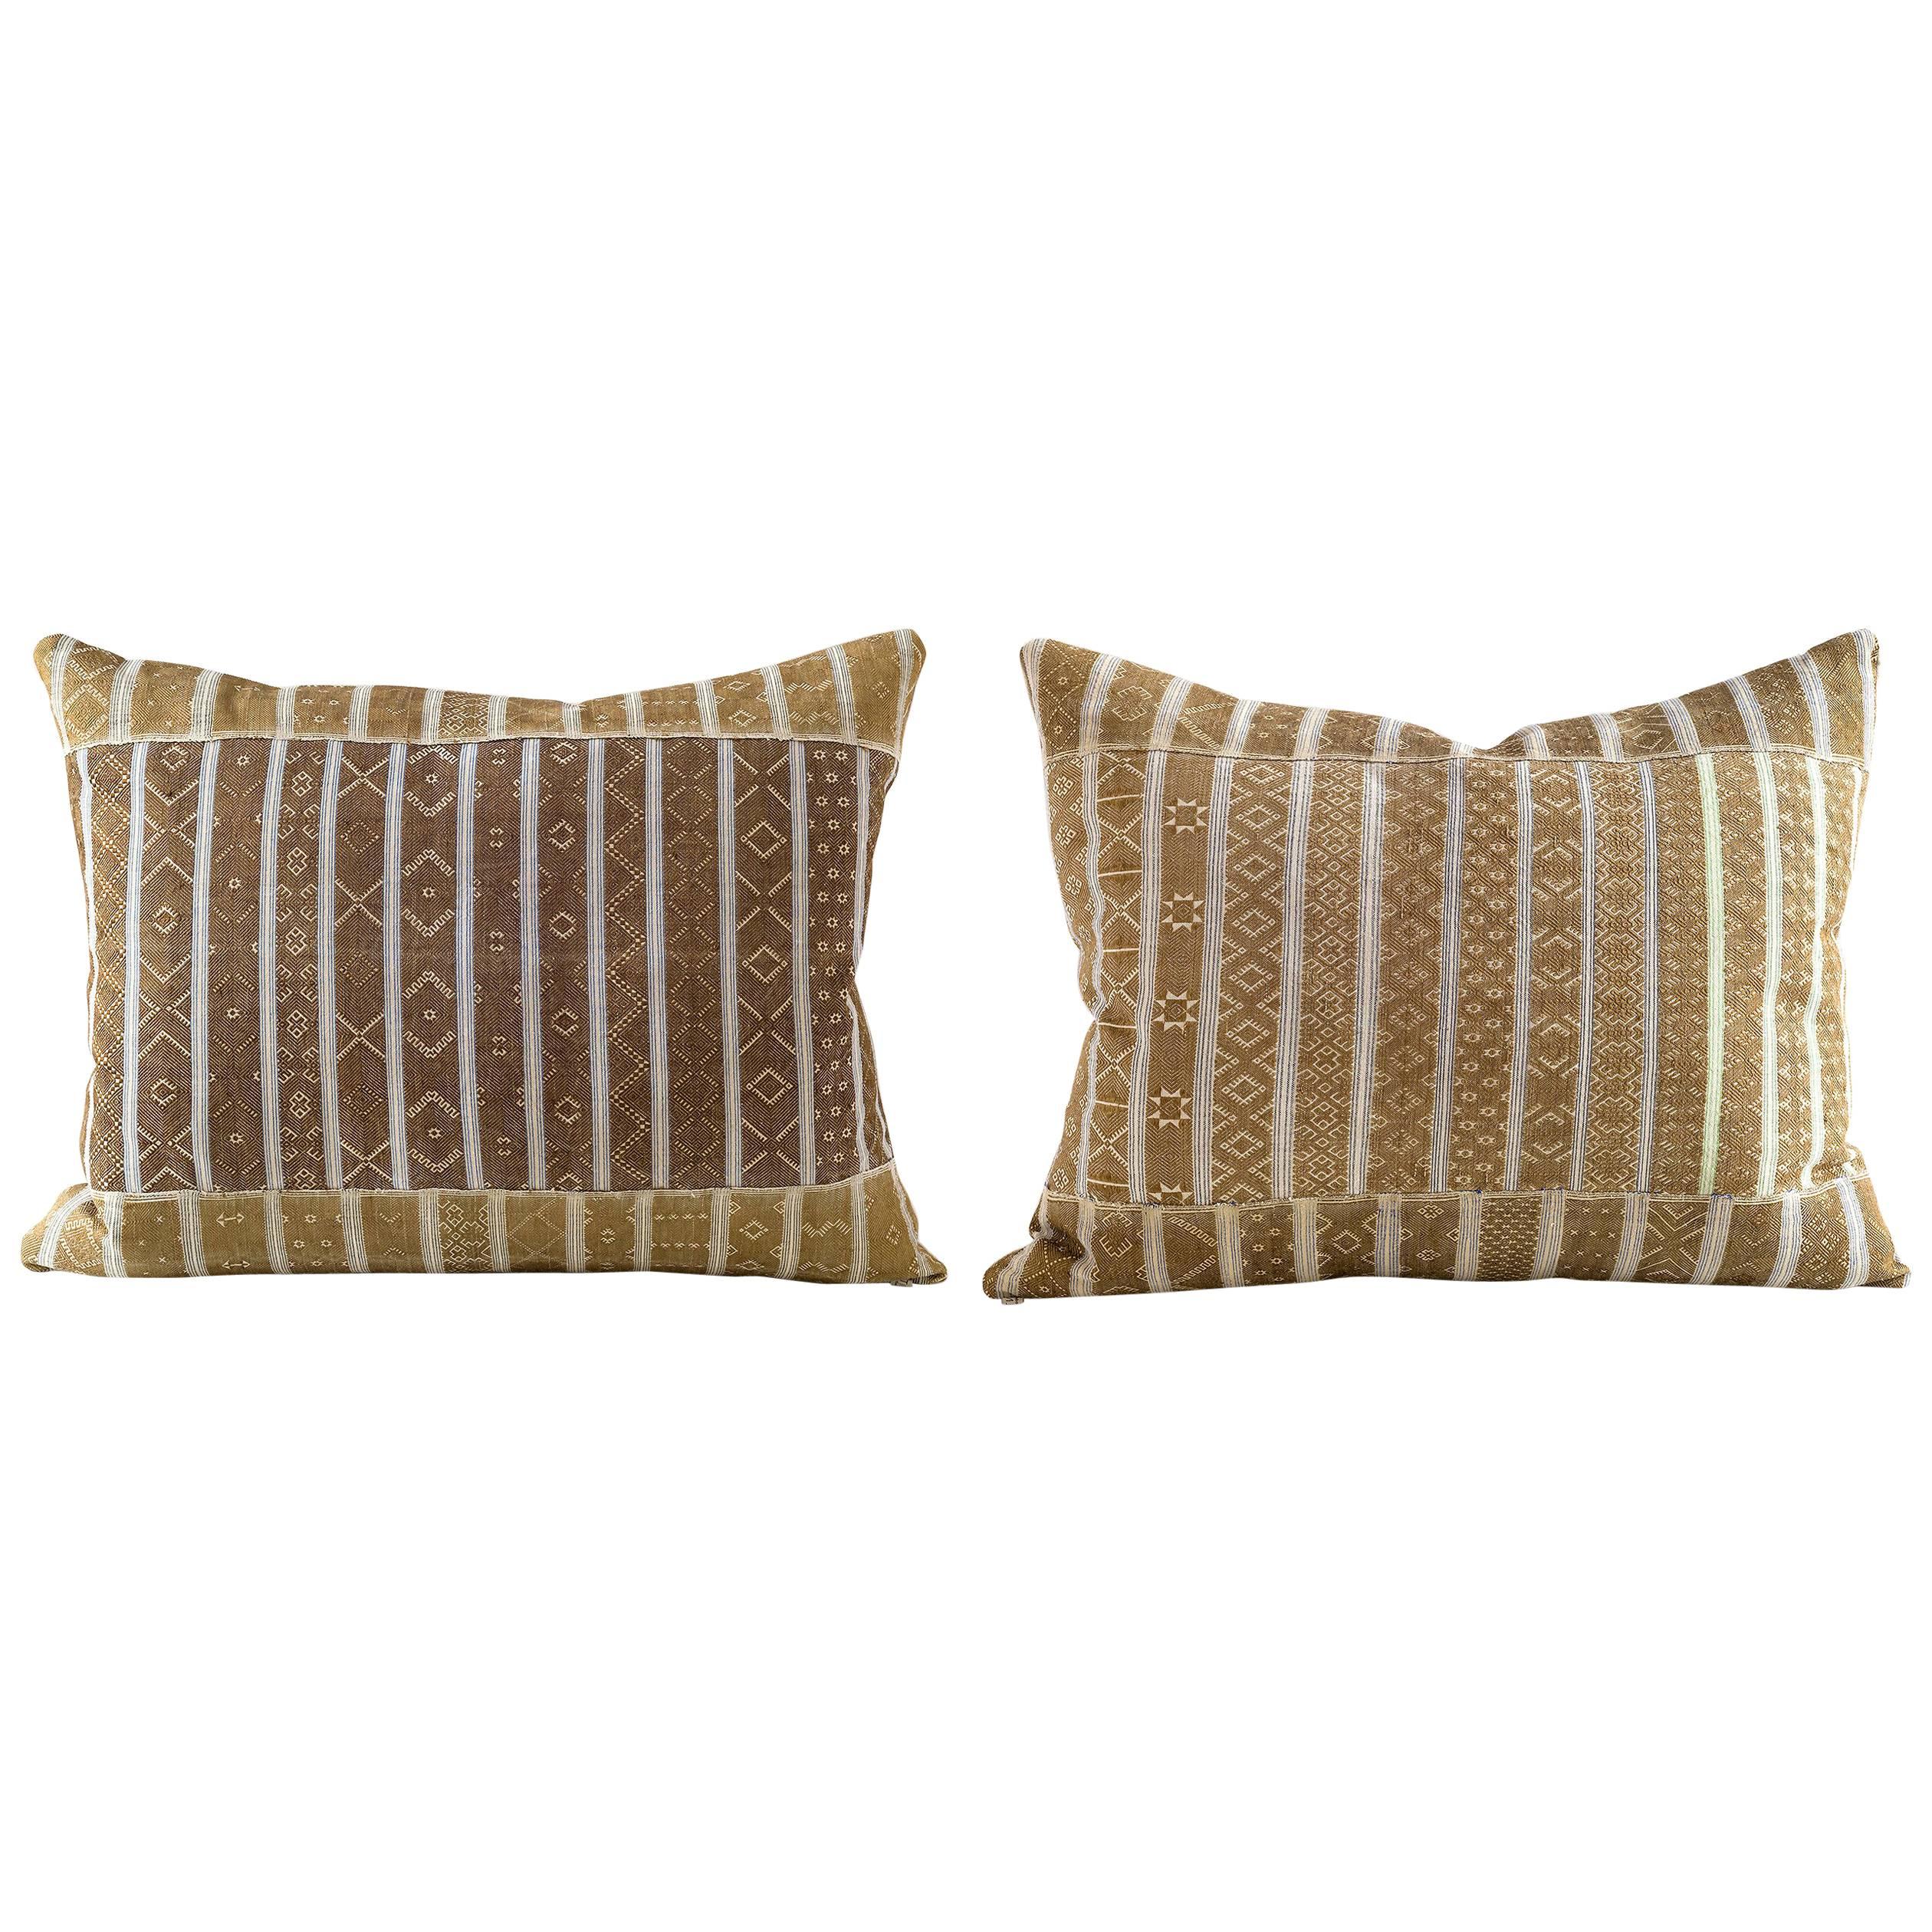 These pillows are made from vintage Miao scarves. They are narrow hand woven fabric in gold and cream colored geometric motifs from cotton and silk with muted lurex details in the fabric. 

Linen on reverse see image
75/25 goose feather and down